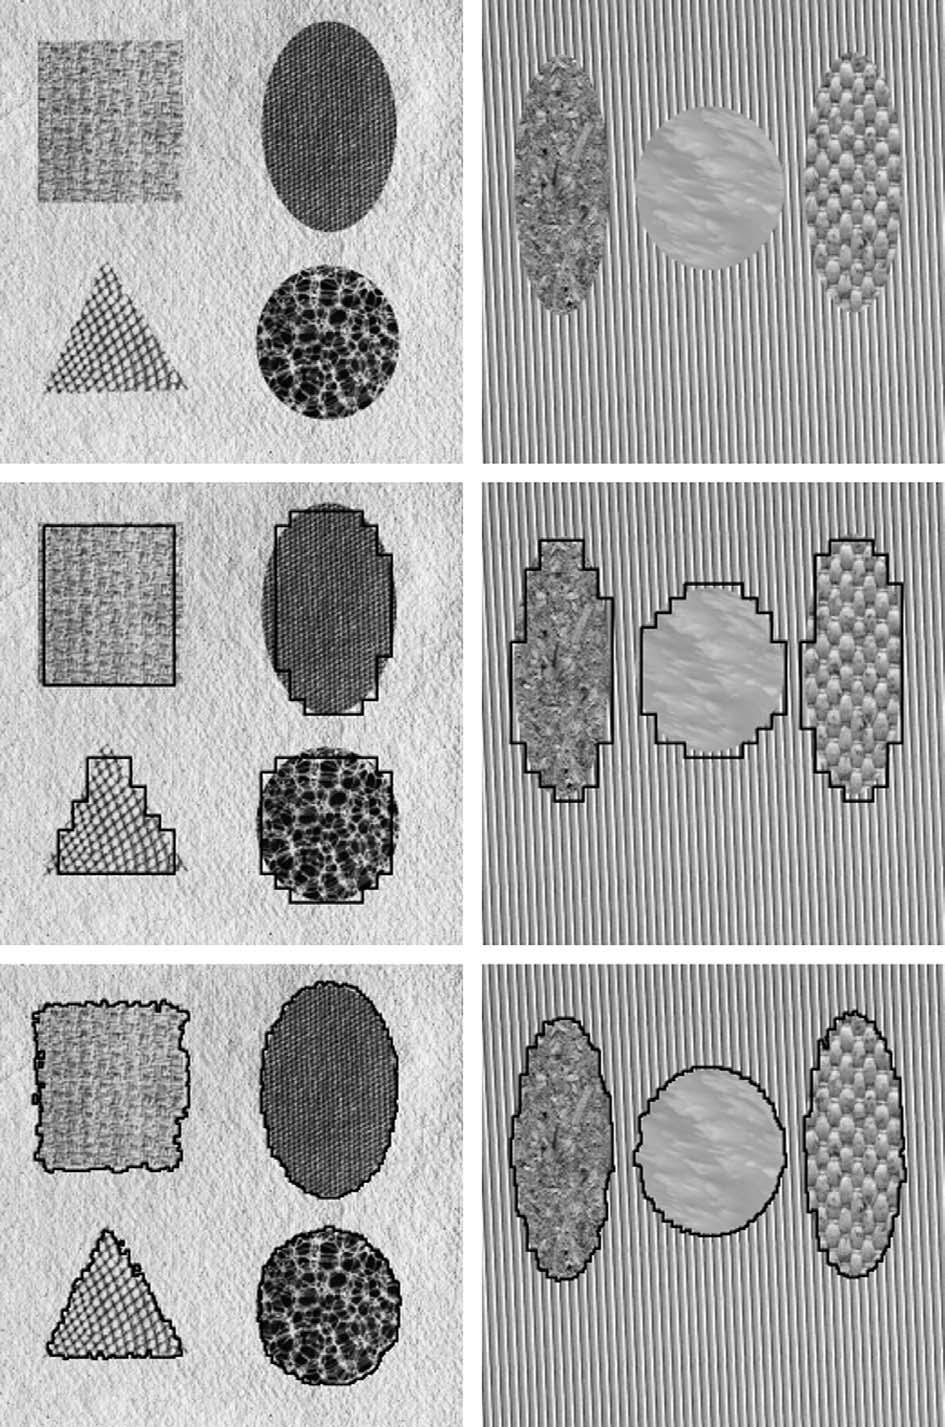 954 P.W. Huang et al. / J. Vis. Commun. Image R. 17 (2006) 947 957 Fig. 3. The segmentation results of two synthesized images. 6.